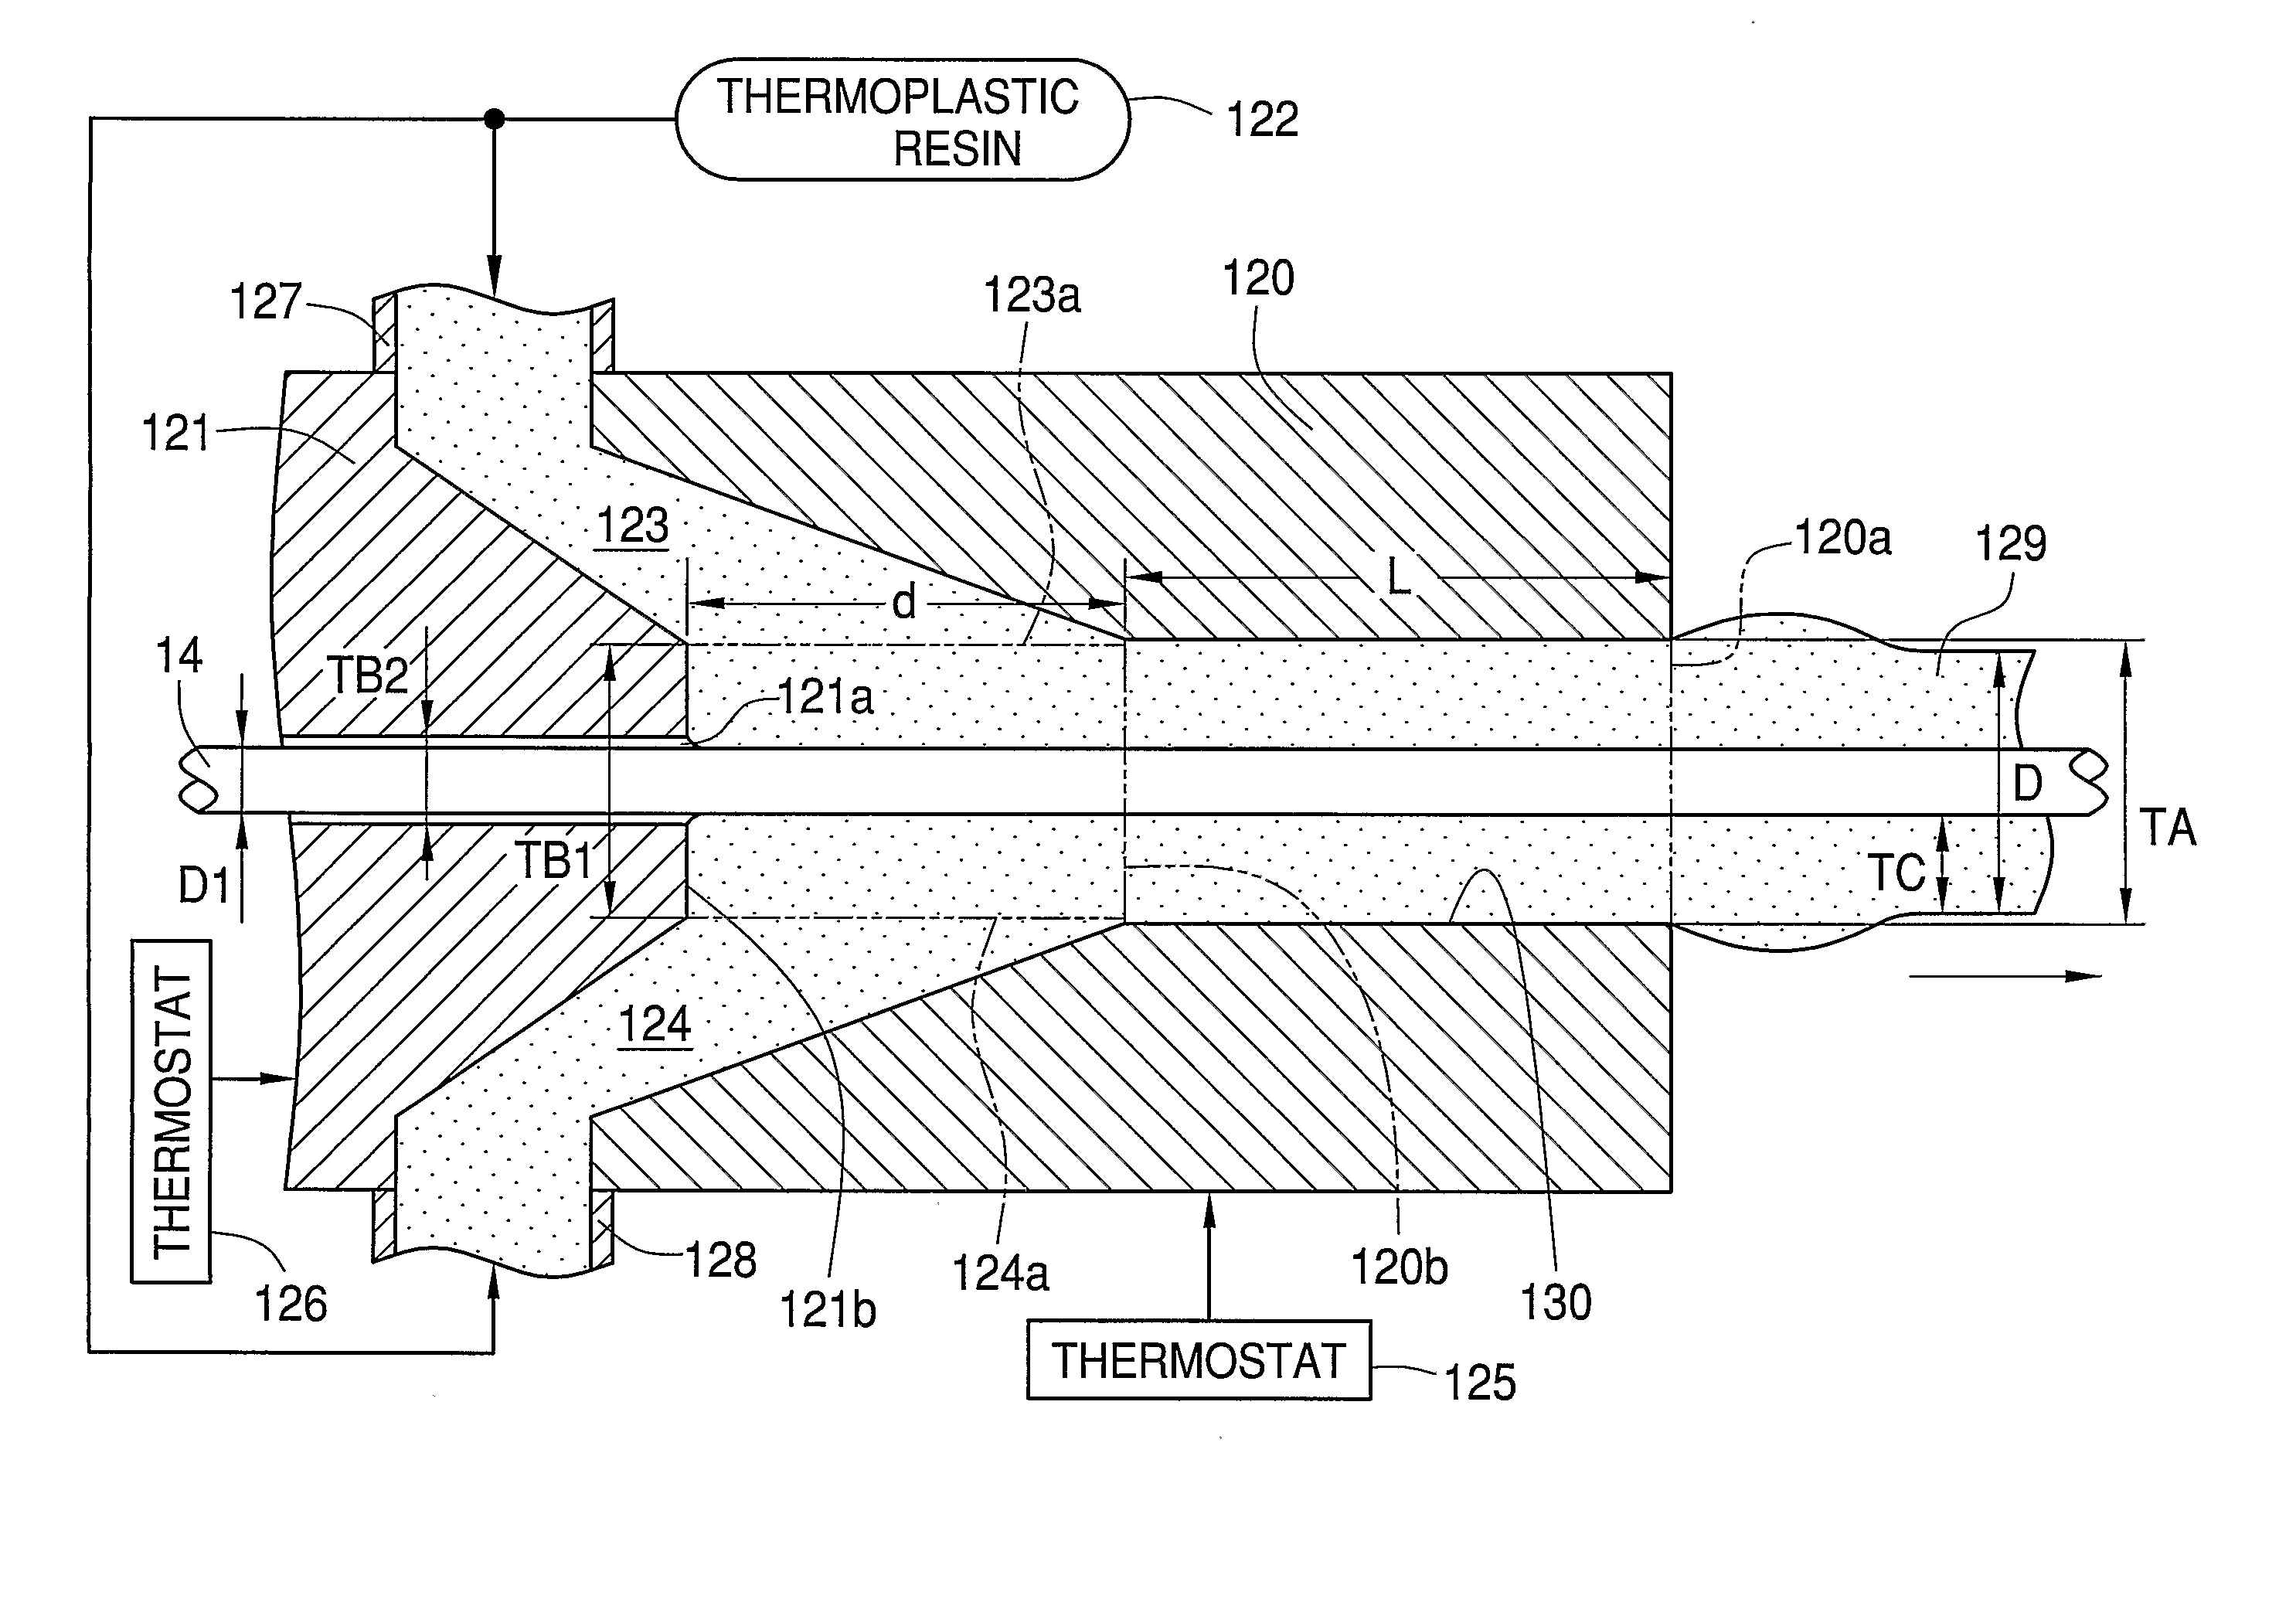 Method and Apparatus for Coating Plastic Optical Fiber with Resin